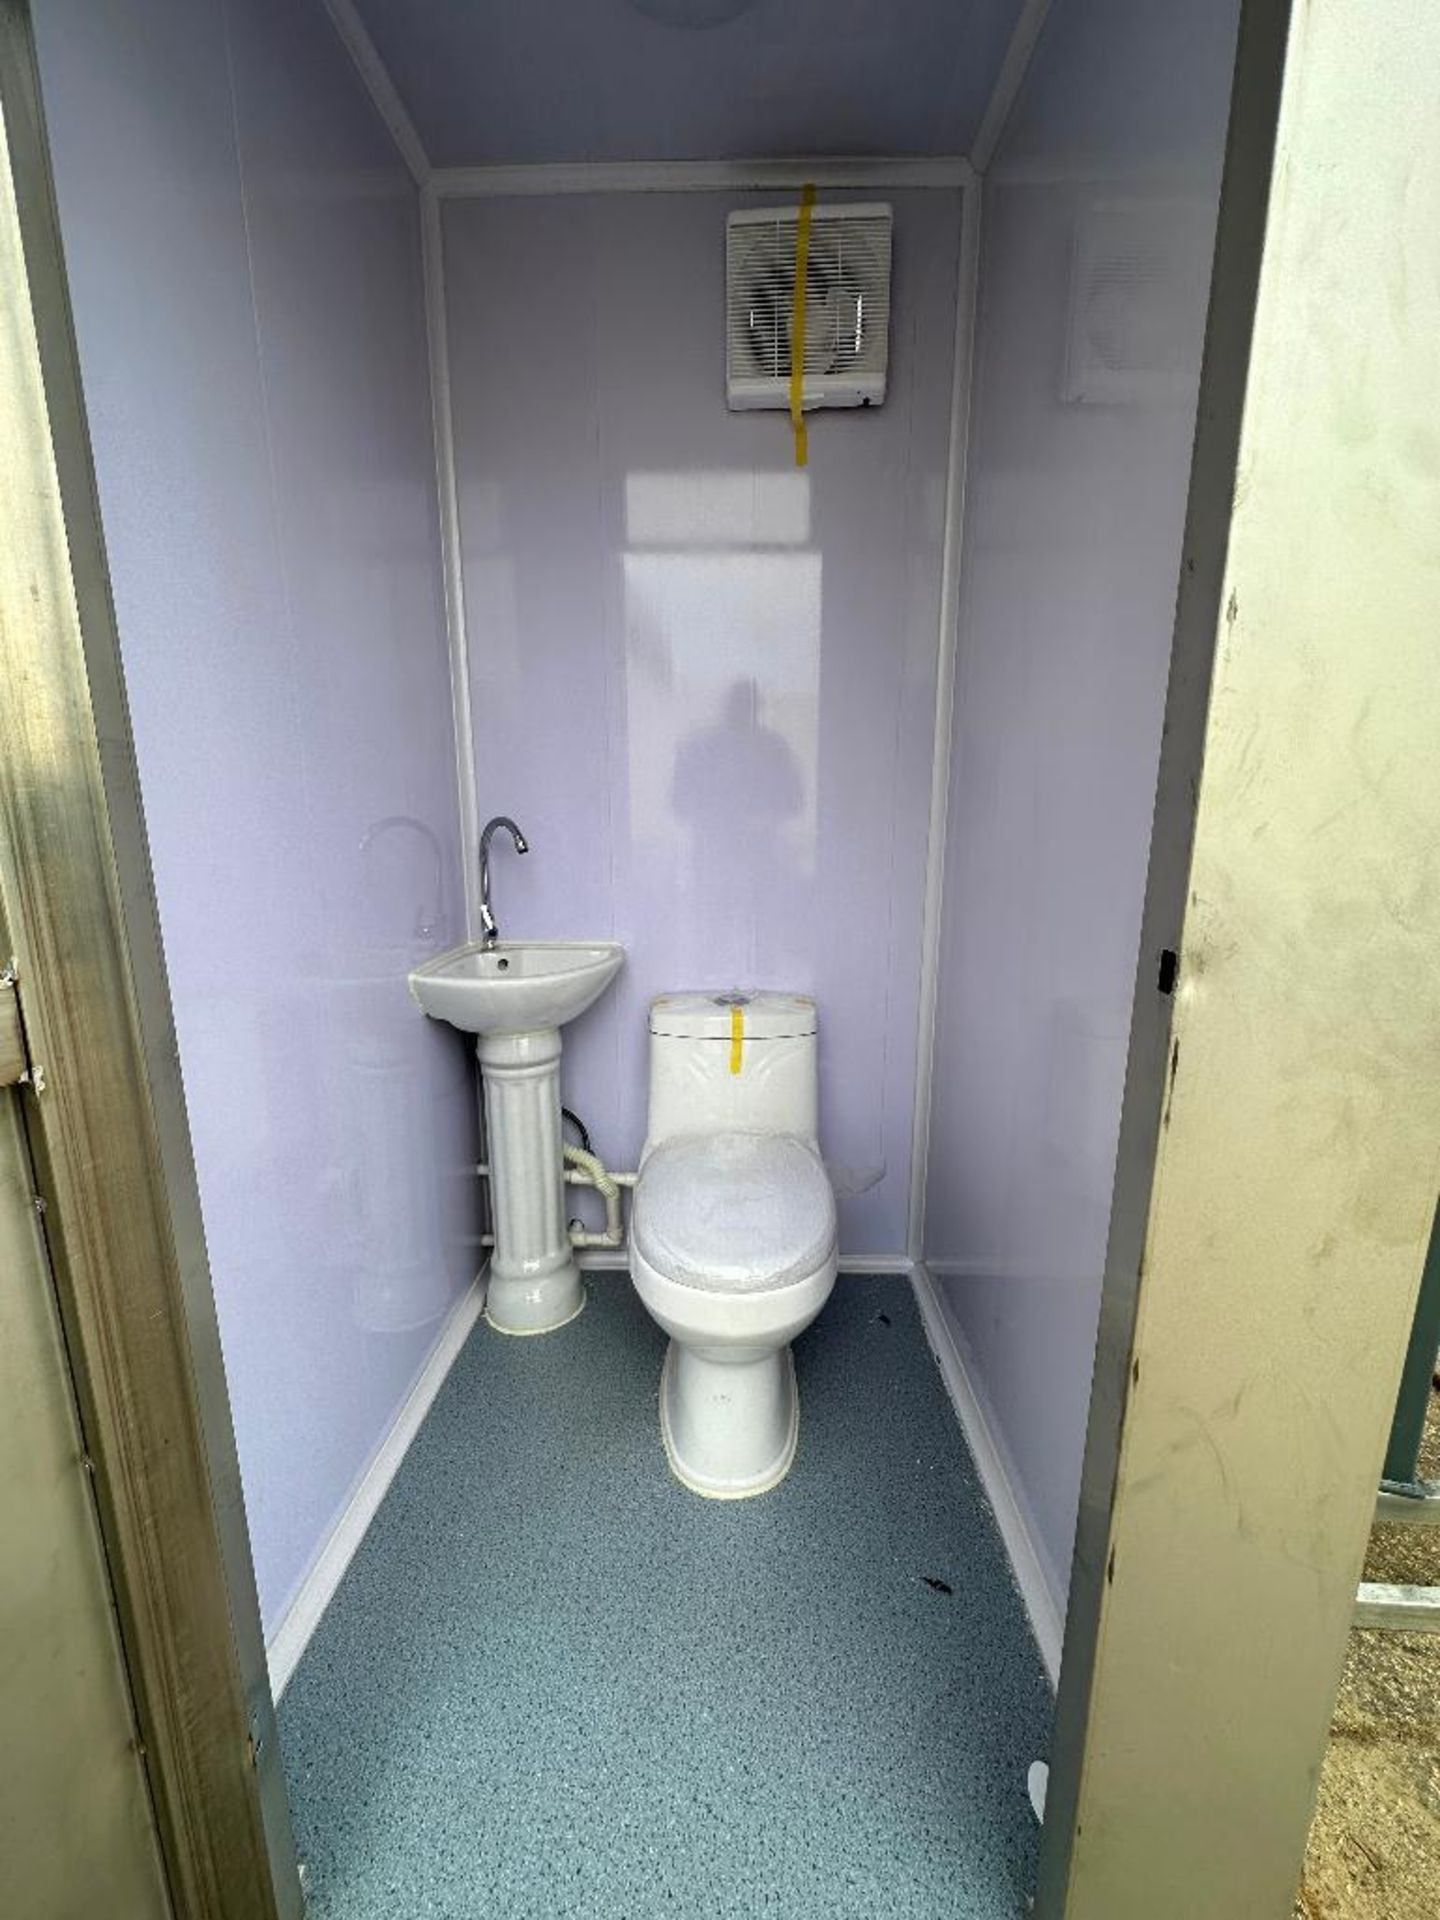 87" X 48" x 93" Double Sided Toilet w/ Fork Pockets, Sinks, Toilets, etc. - Image 6 of 9